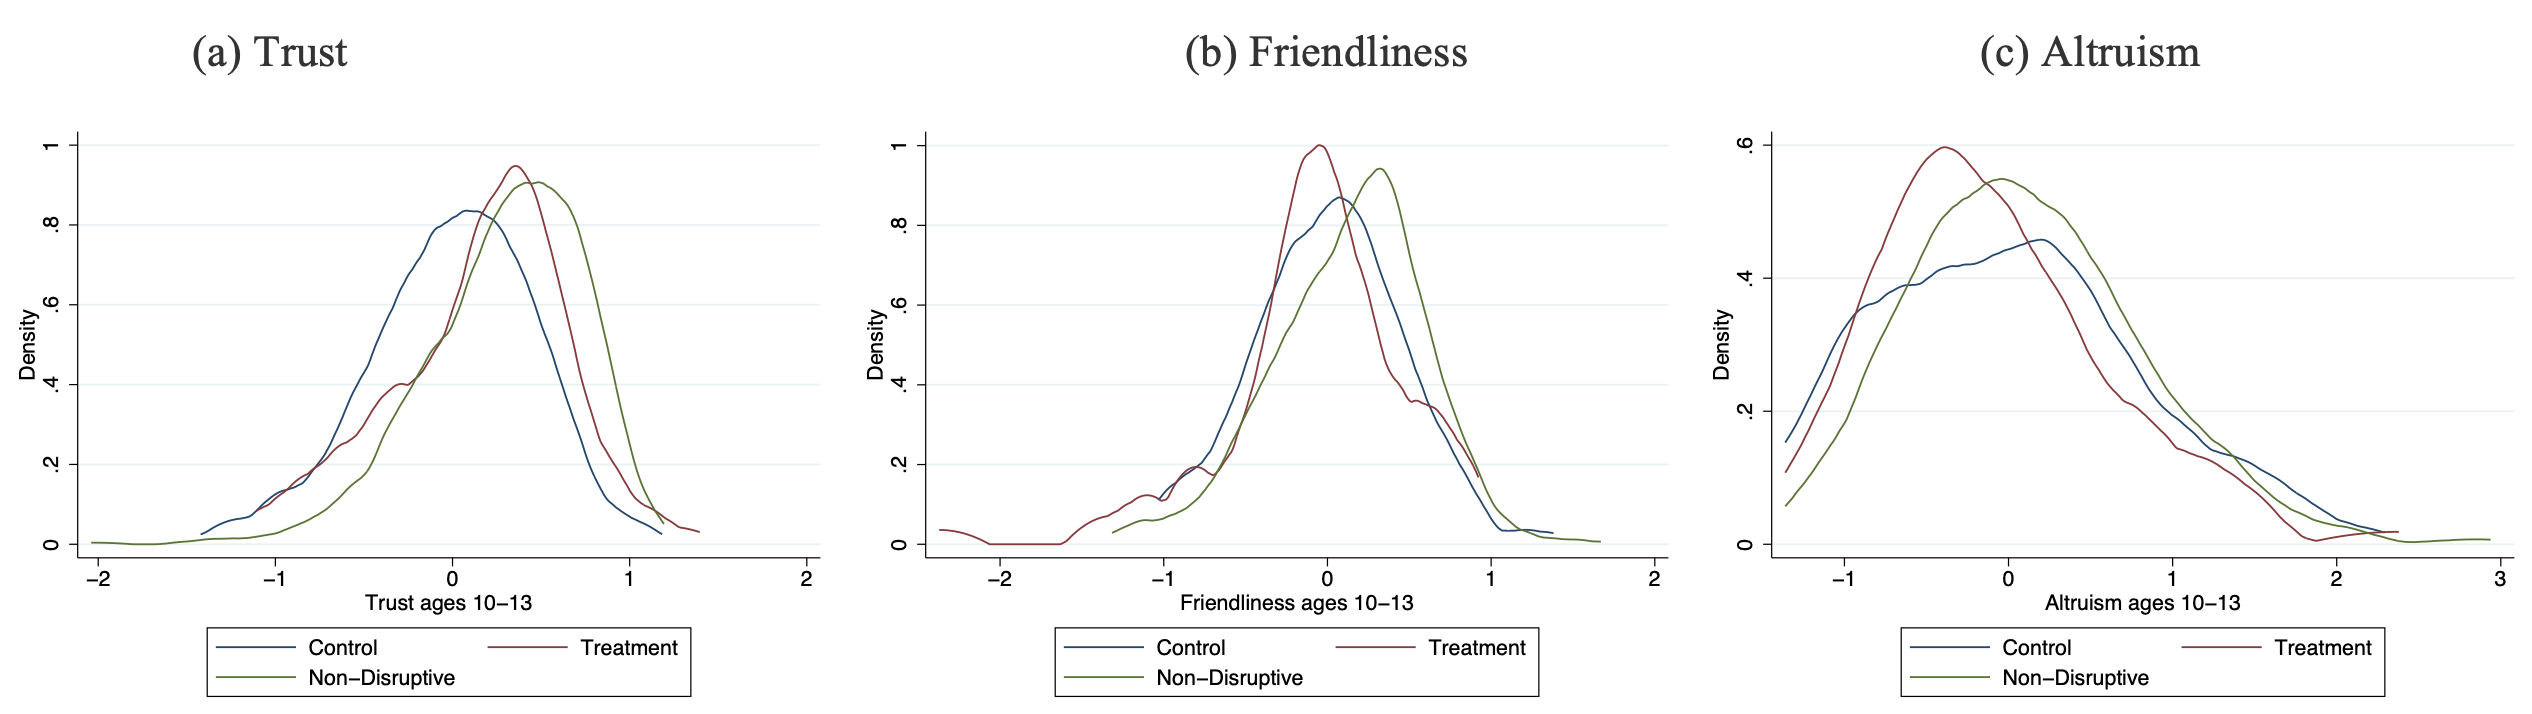 Figure 3 Trust, friendliness, and altruism are different skills, and only trust was impacted